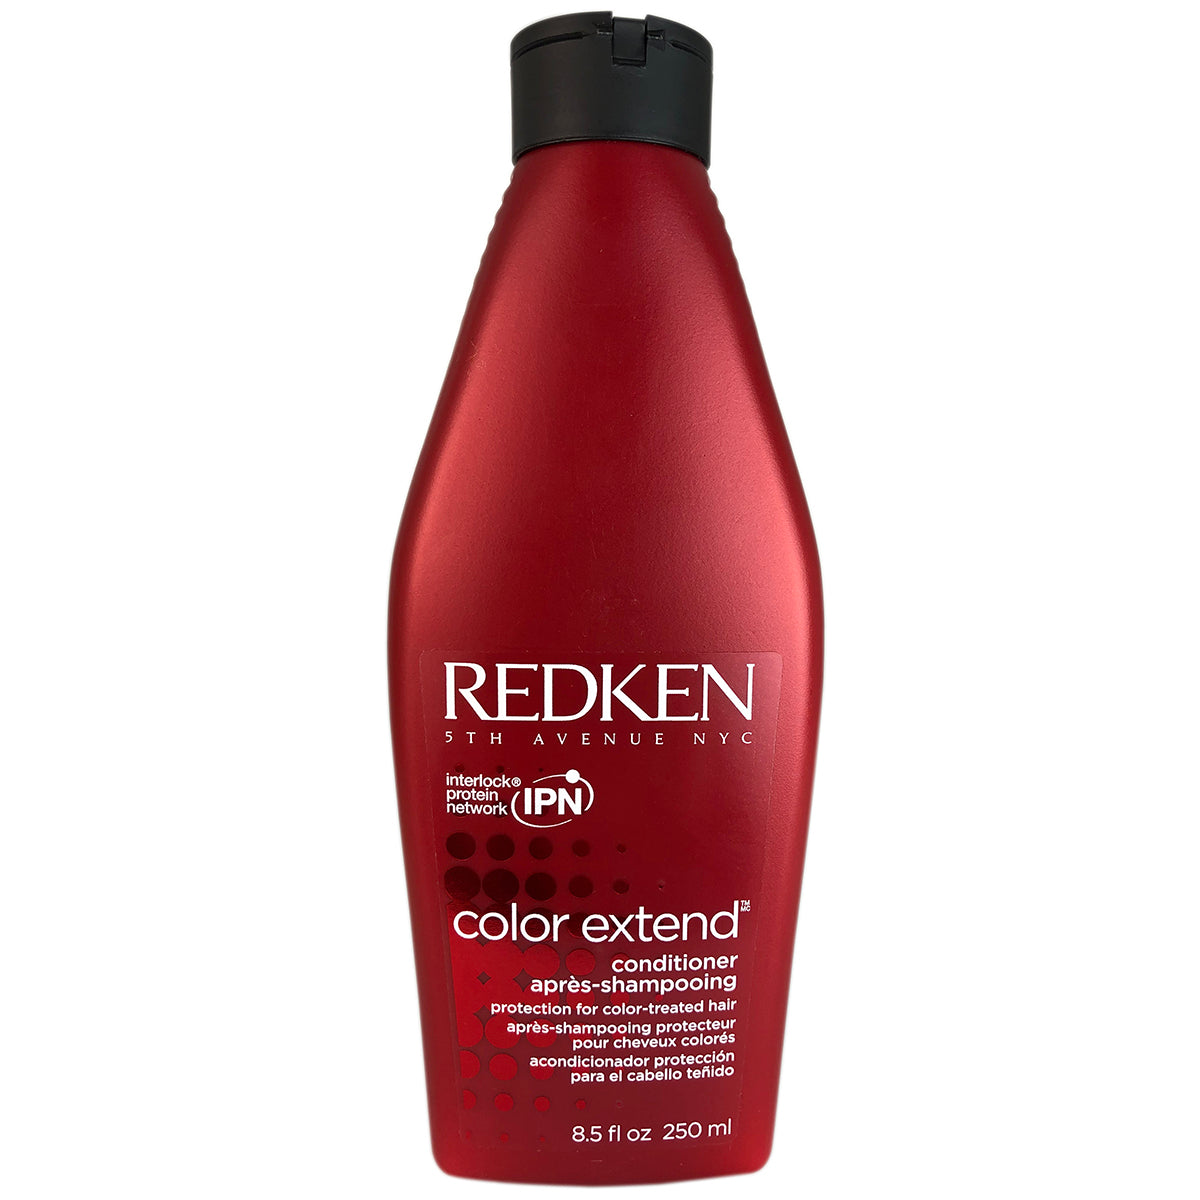 Redken Color Extend Conditioner for Colored Treated Hair  8.5 oz.